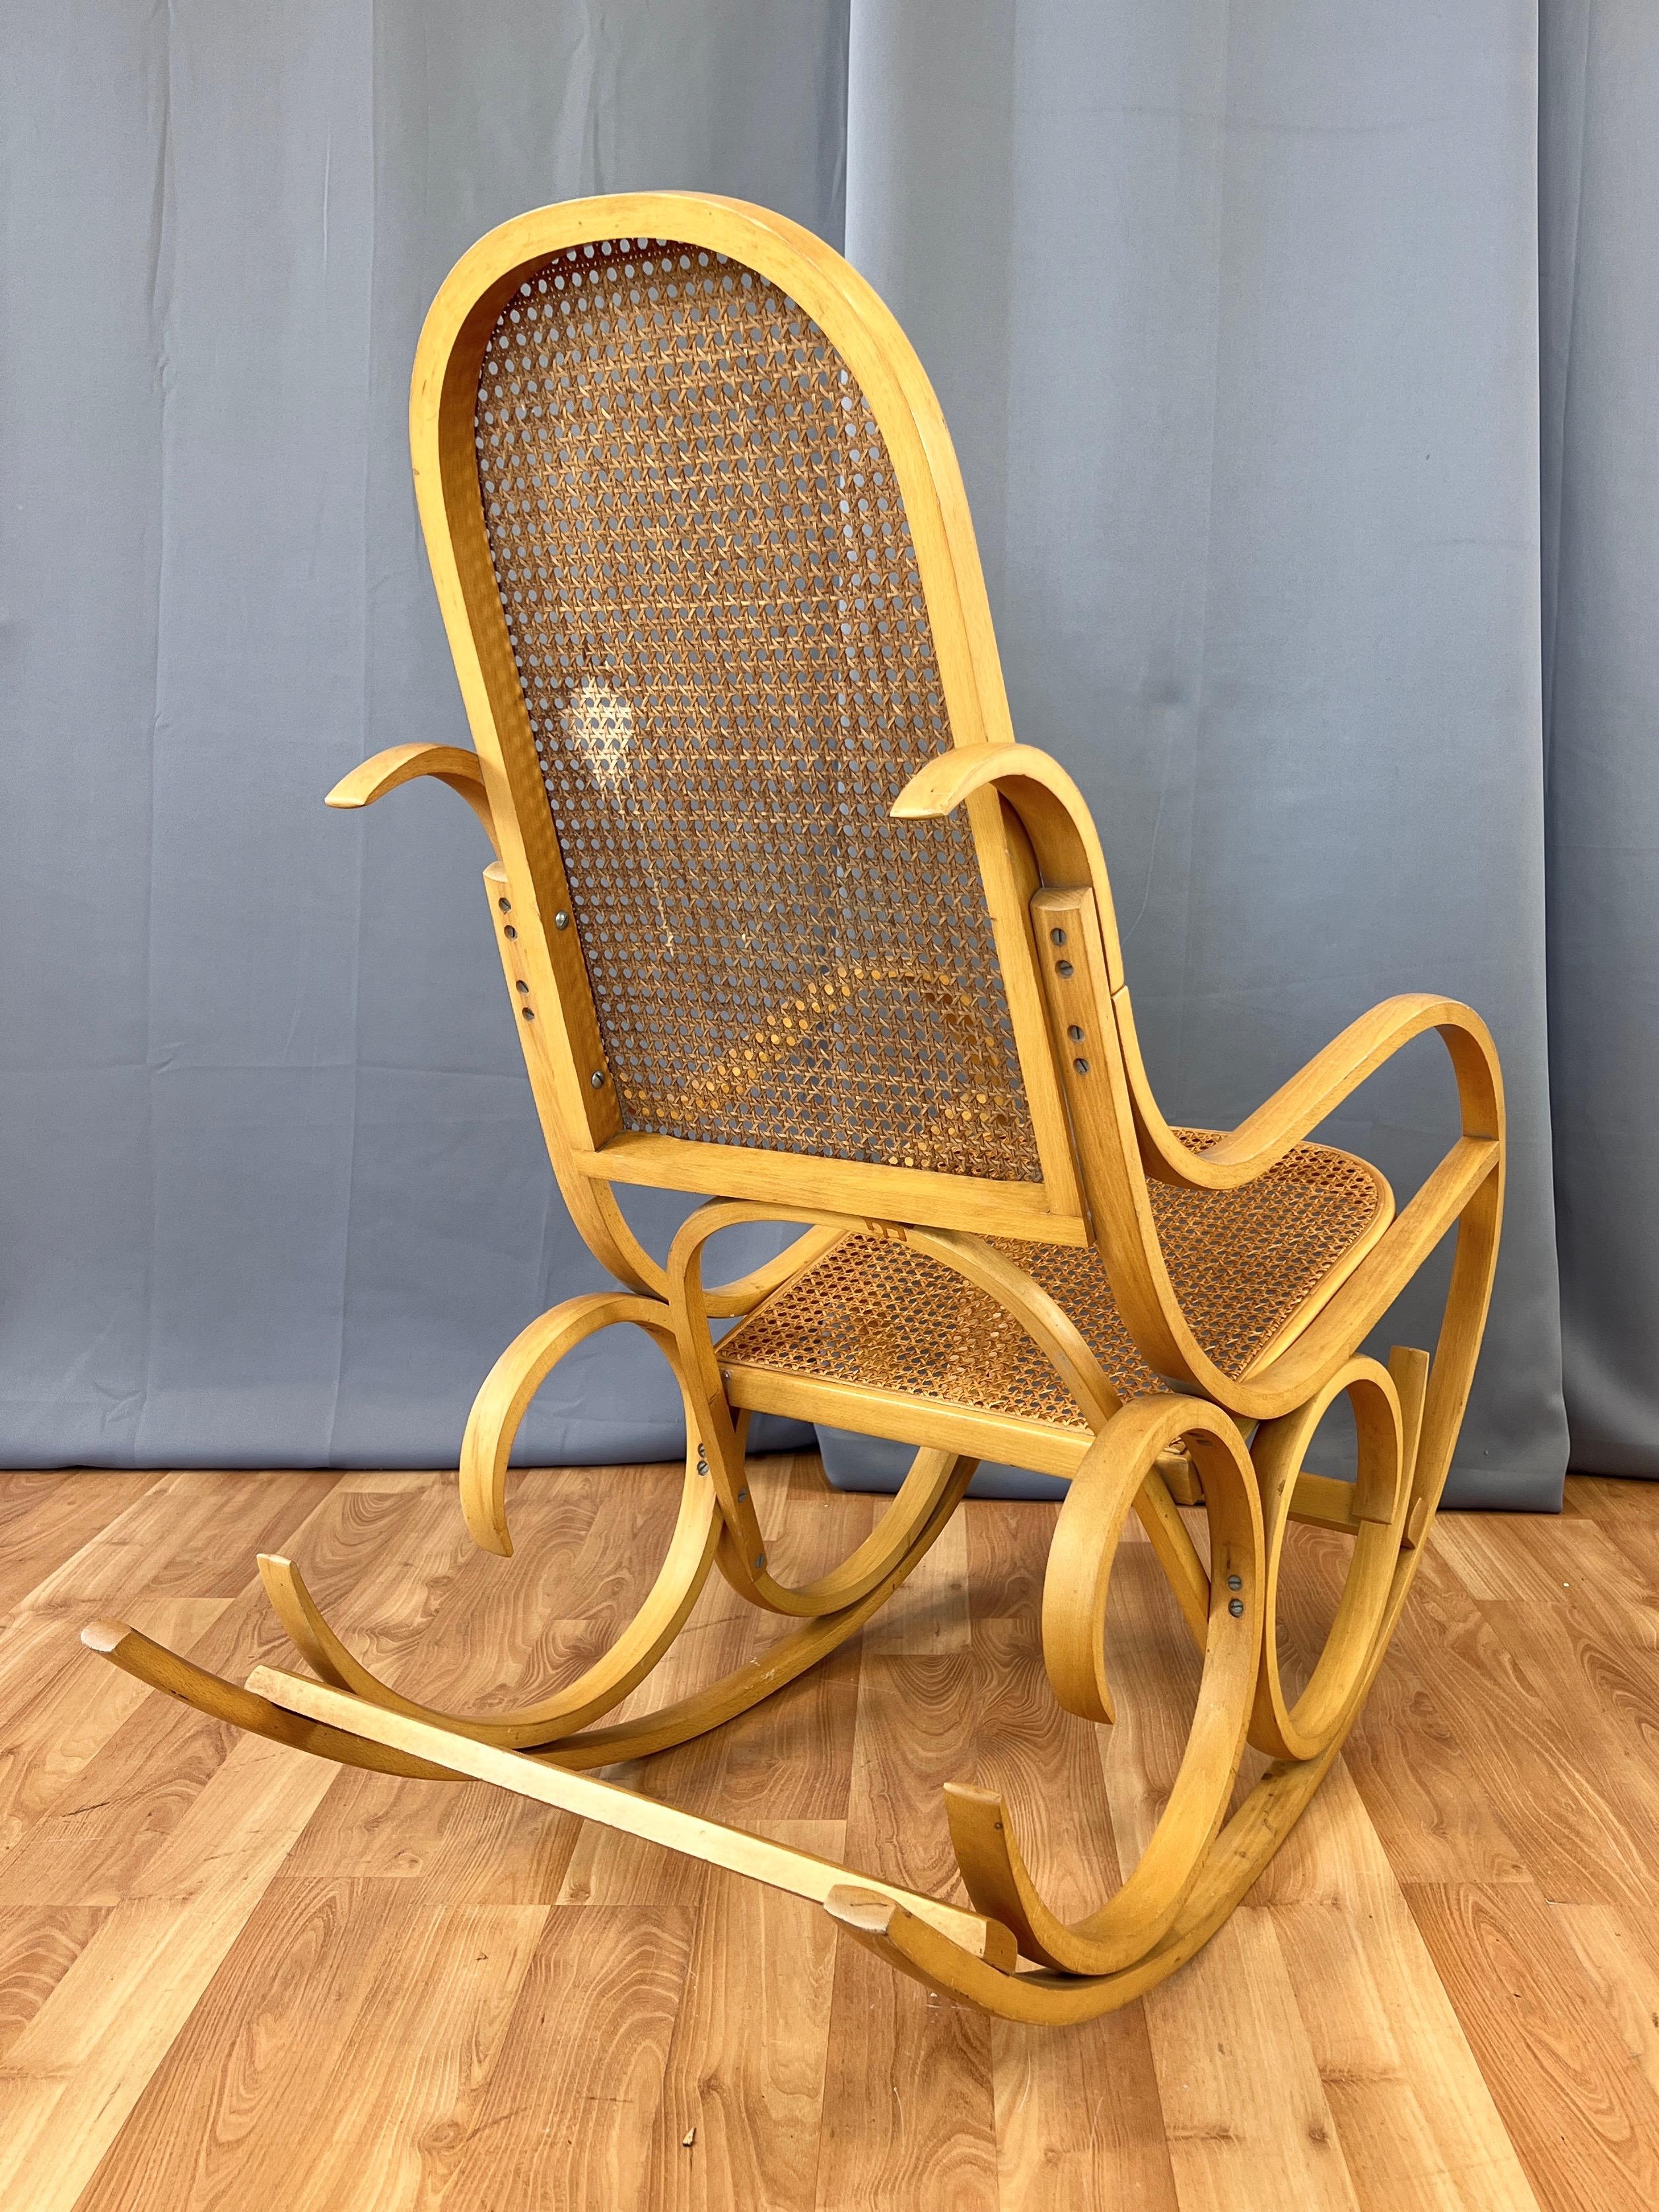 Late 20th Century Luigi Crassevig Italian Bentwood Rocking Chair with Woven Cane Seat, 1970s For Sale